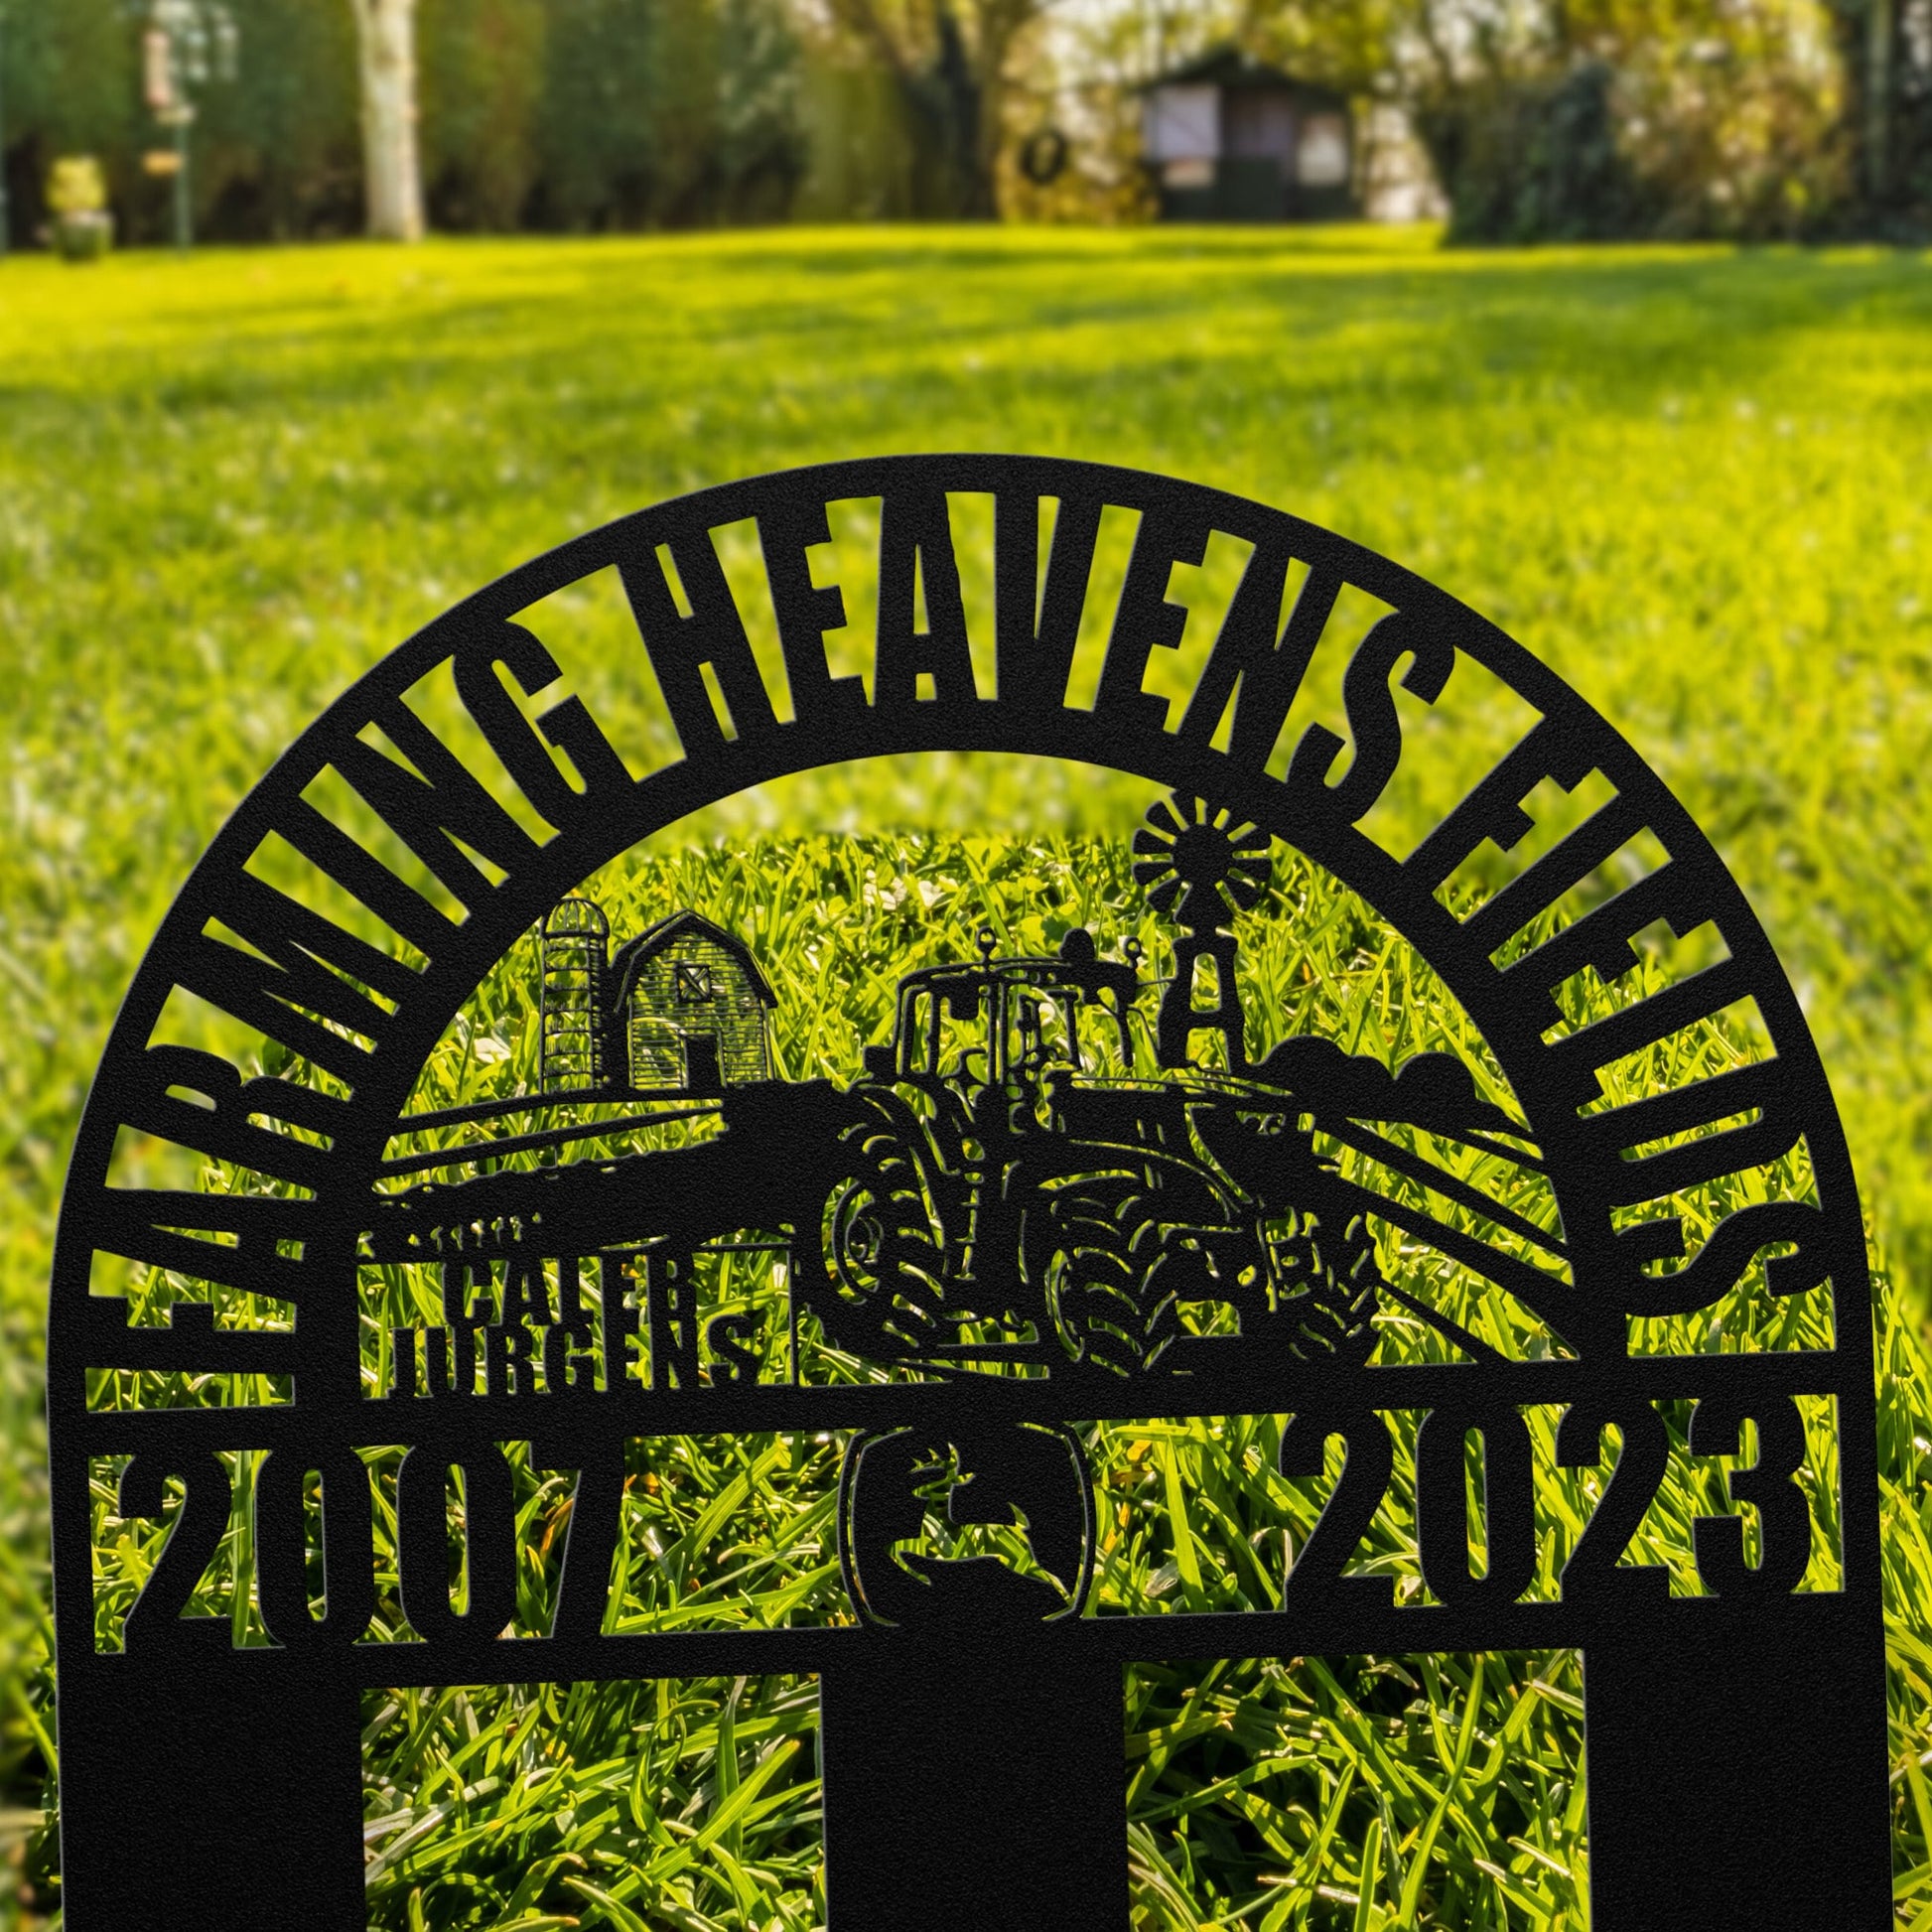 Personalize Your Heartfelt Farmer Memorial: A Sympathy Gift for Loss of a Beloved Farmer